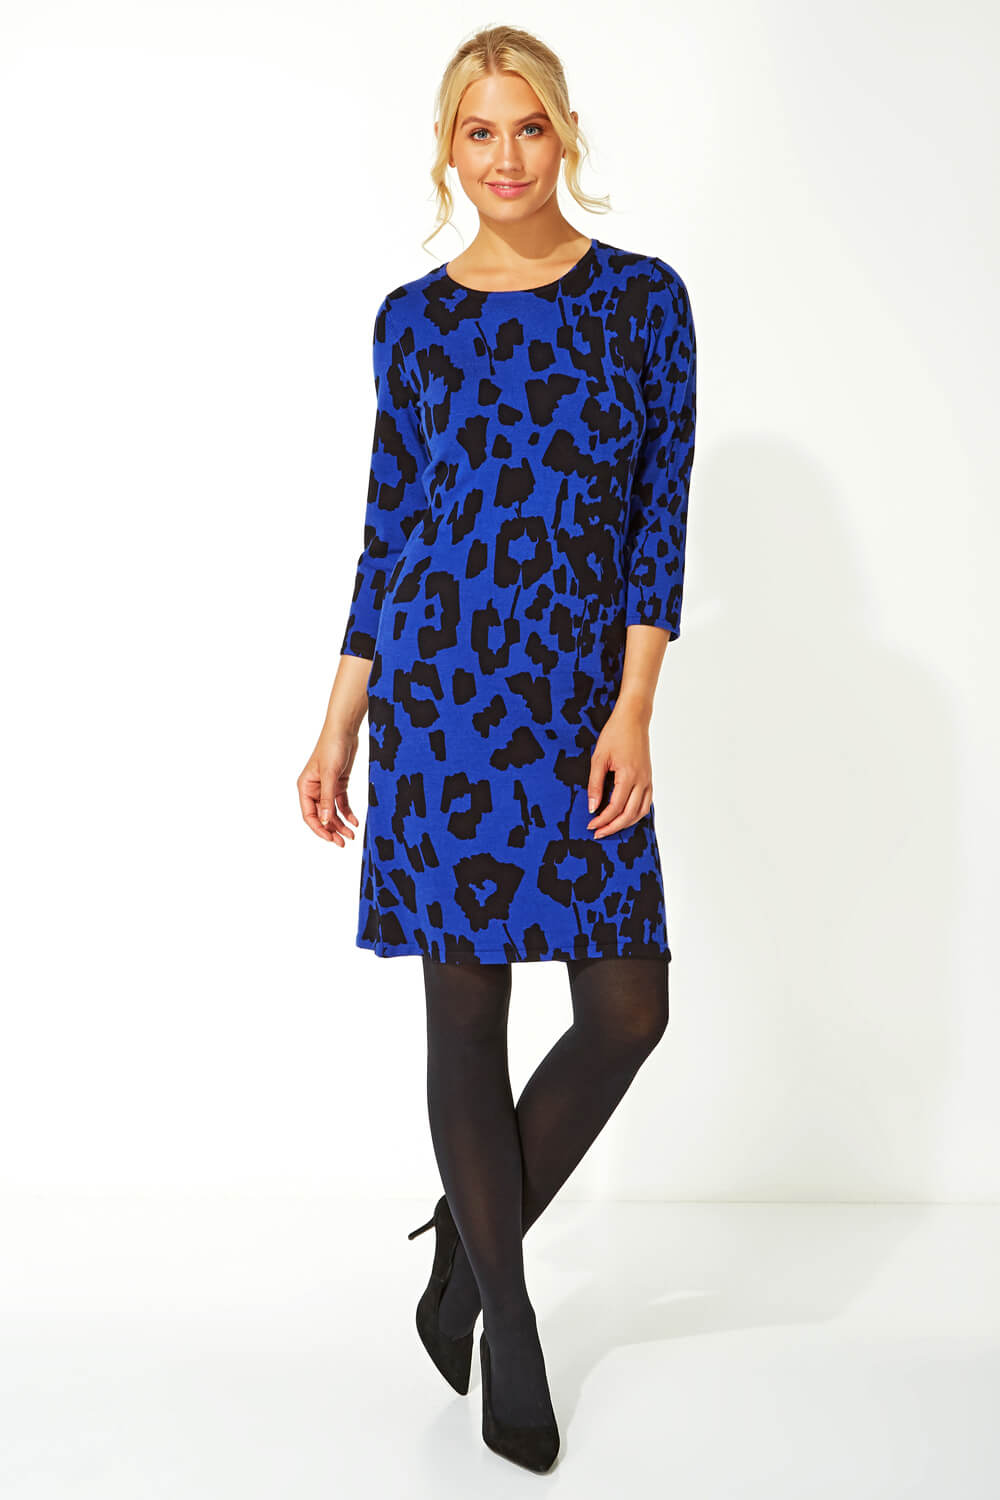 Royal Blue Leopard Print Knitted Dress, Image 2 of 4